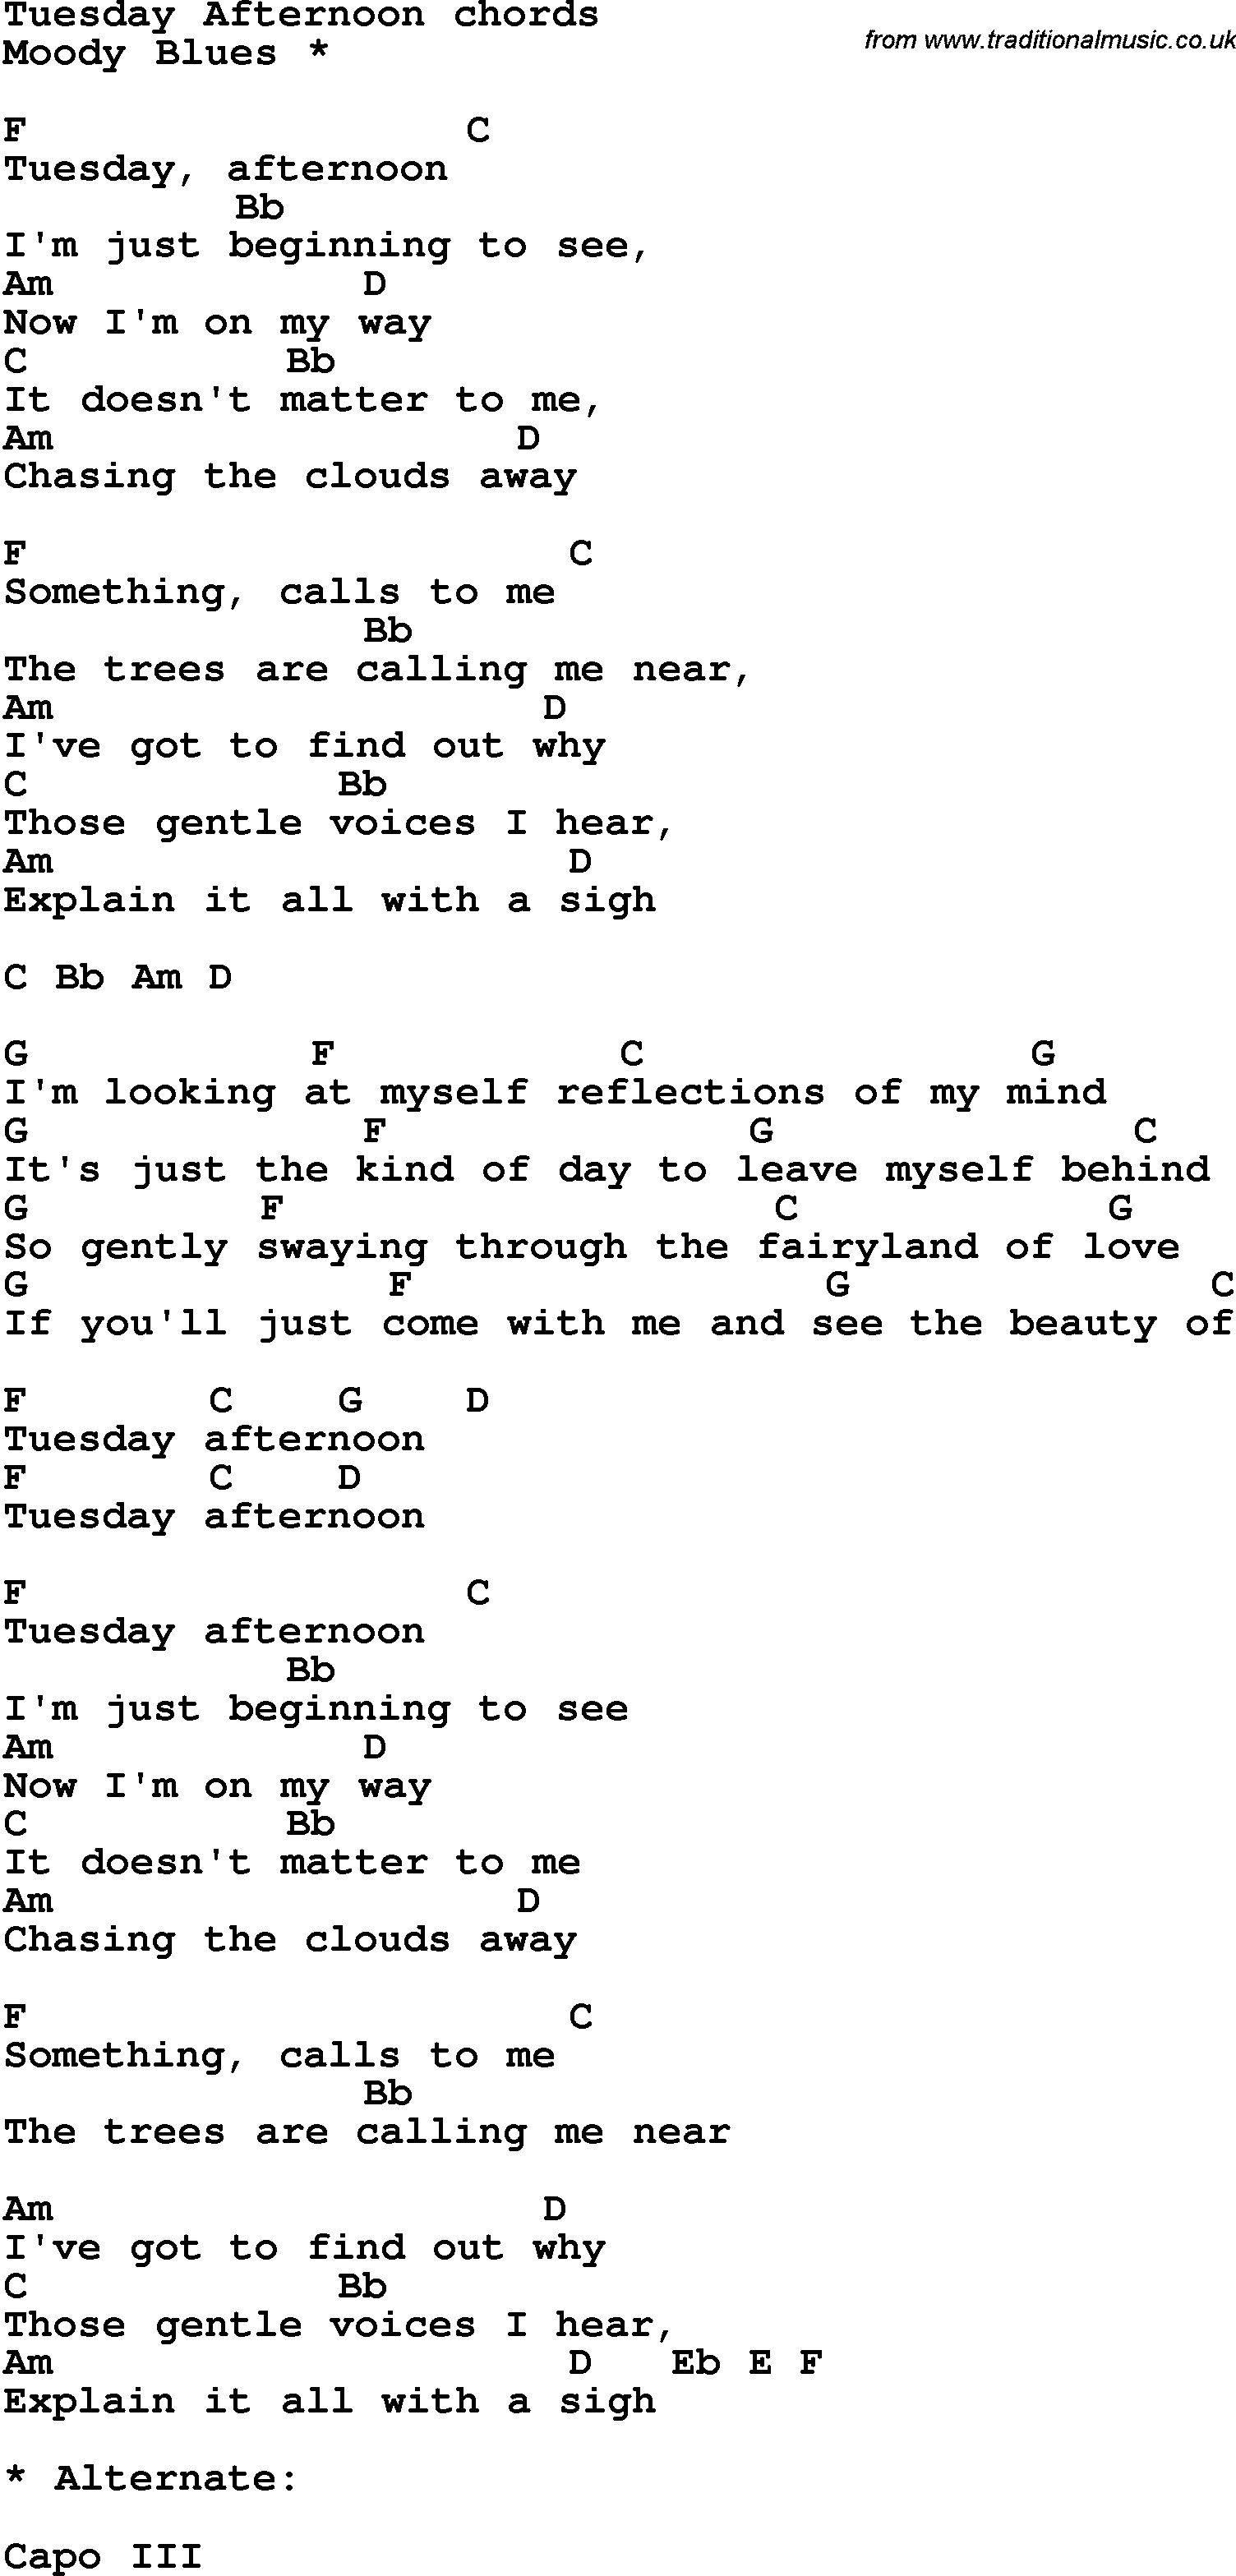 Song Lyrics with guitar chords for Tuesday Afternoon